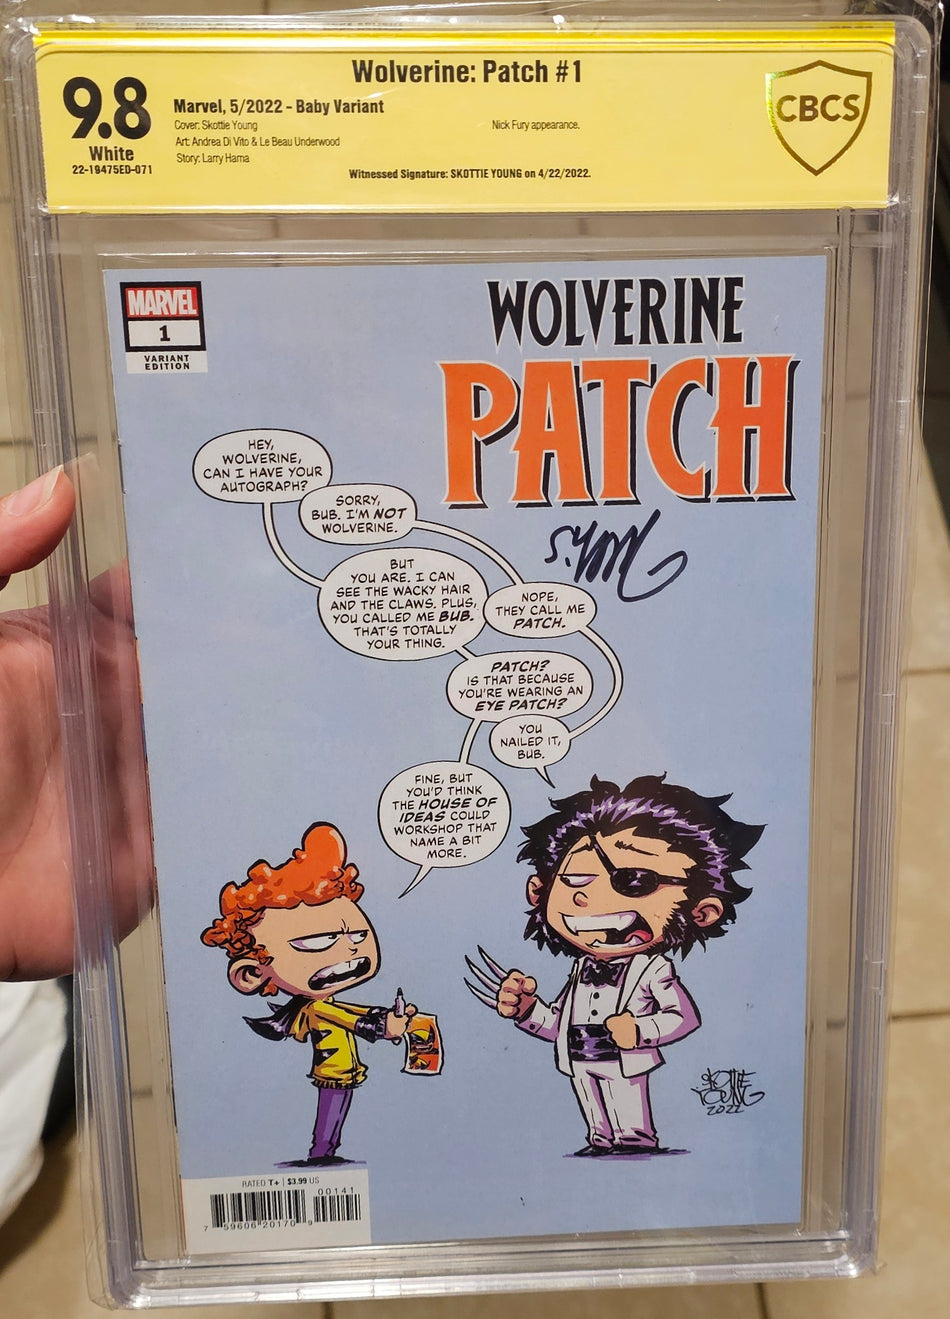 Wolverine: Patch #1 Skottie Young CBCS 9.8 WITNESSED Signature SIGNED by YOUNG (Nick Fury Appearances)